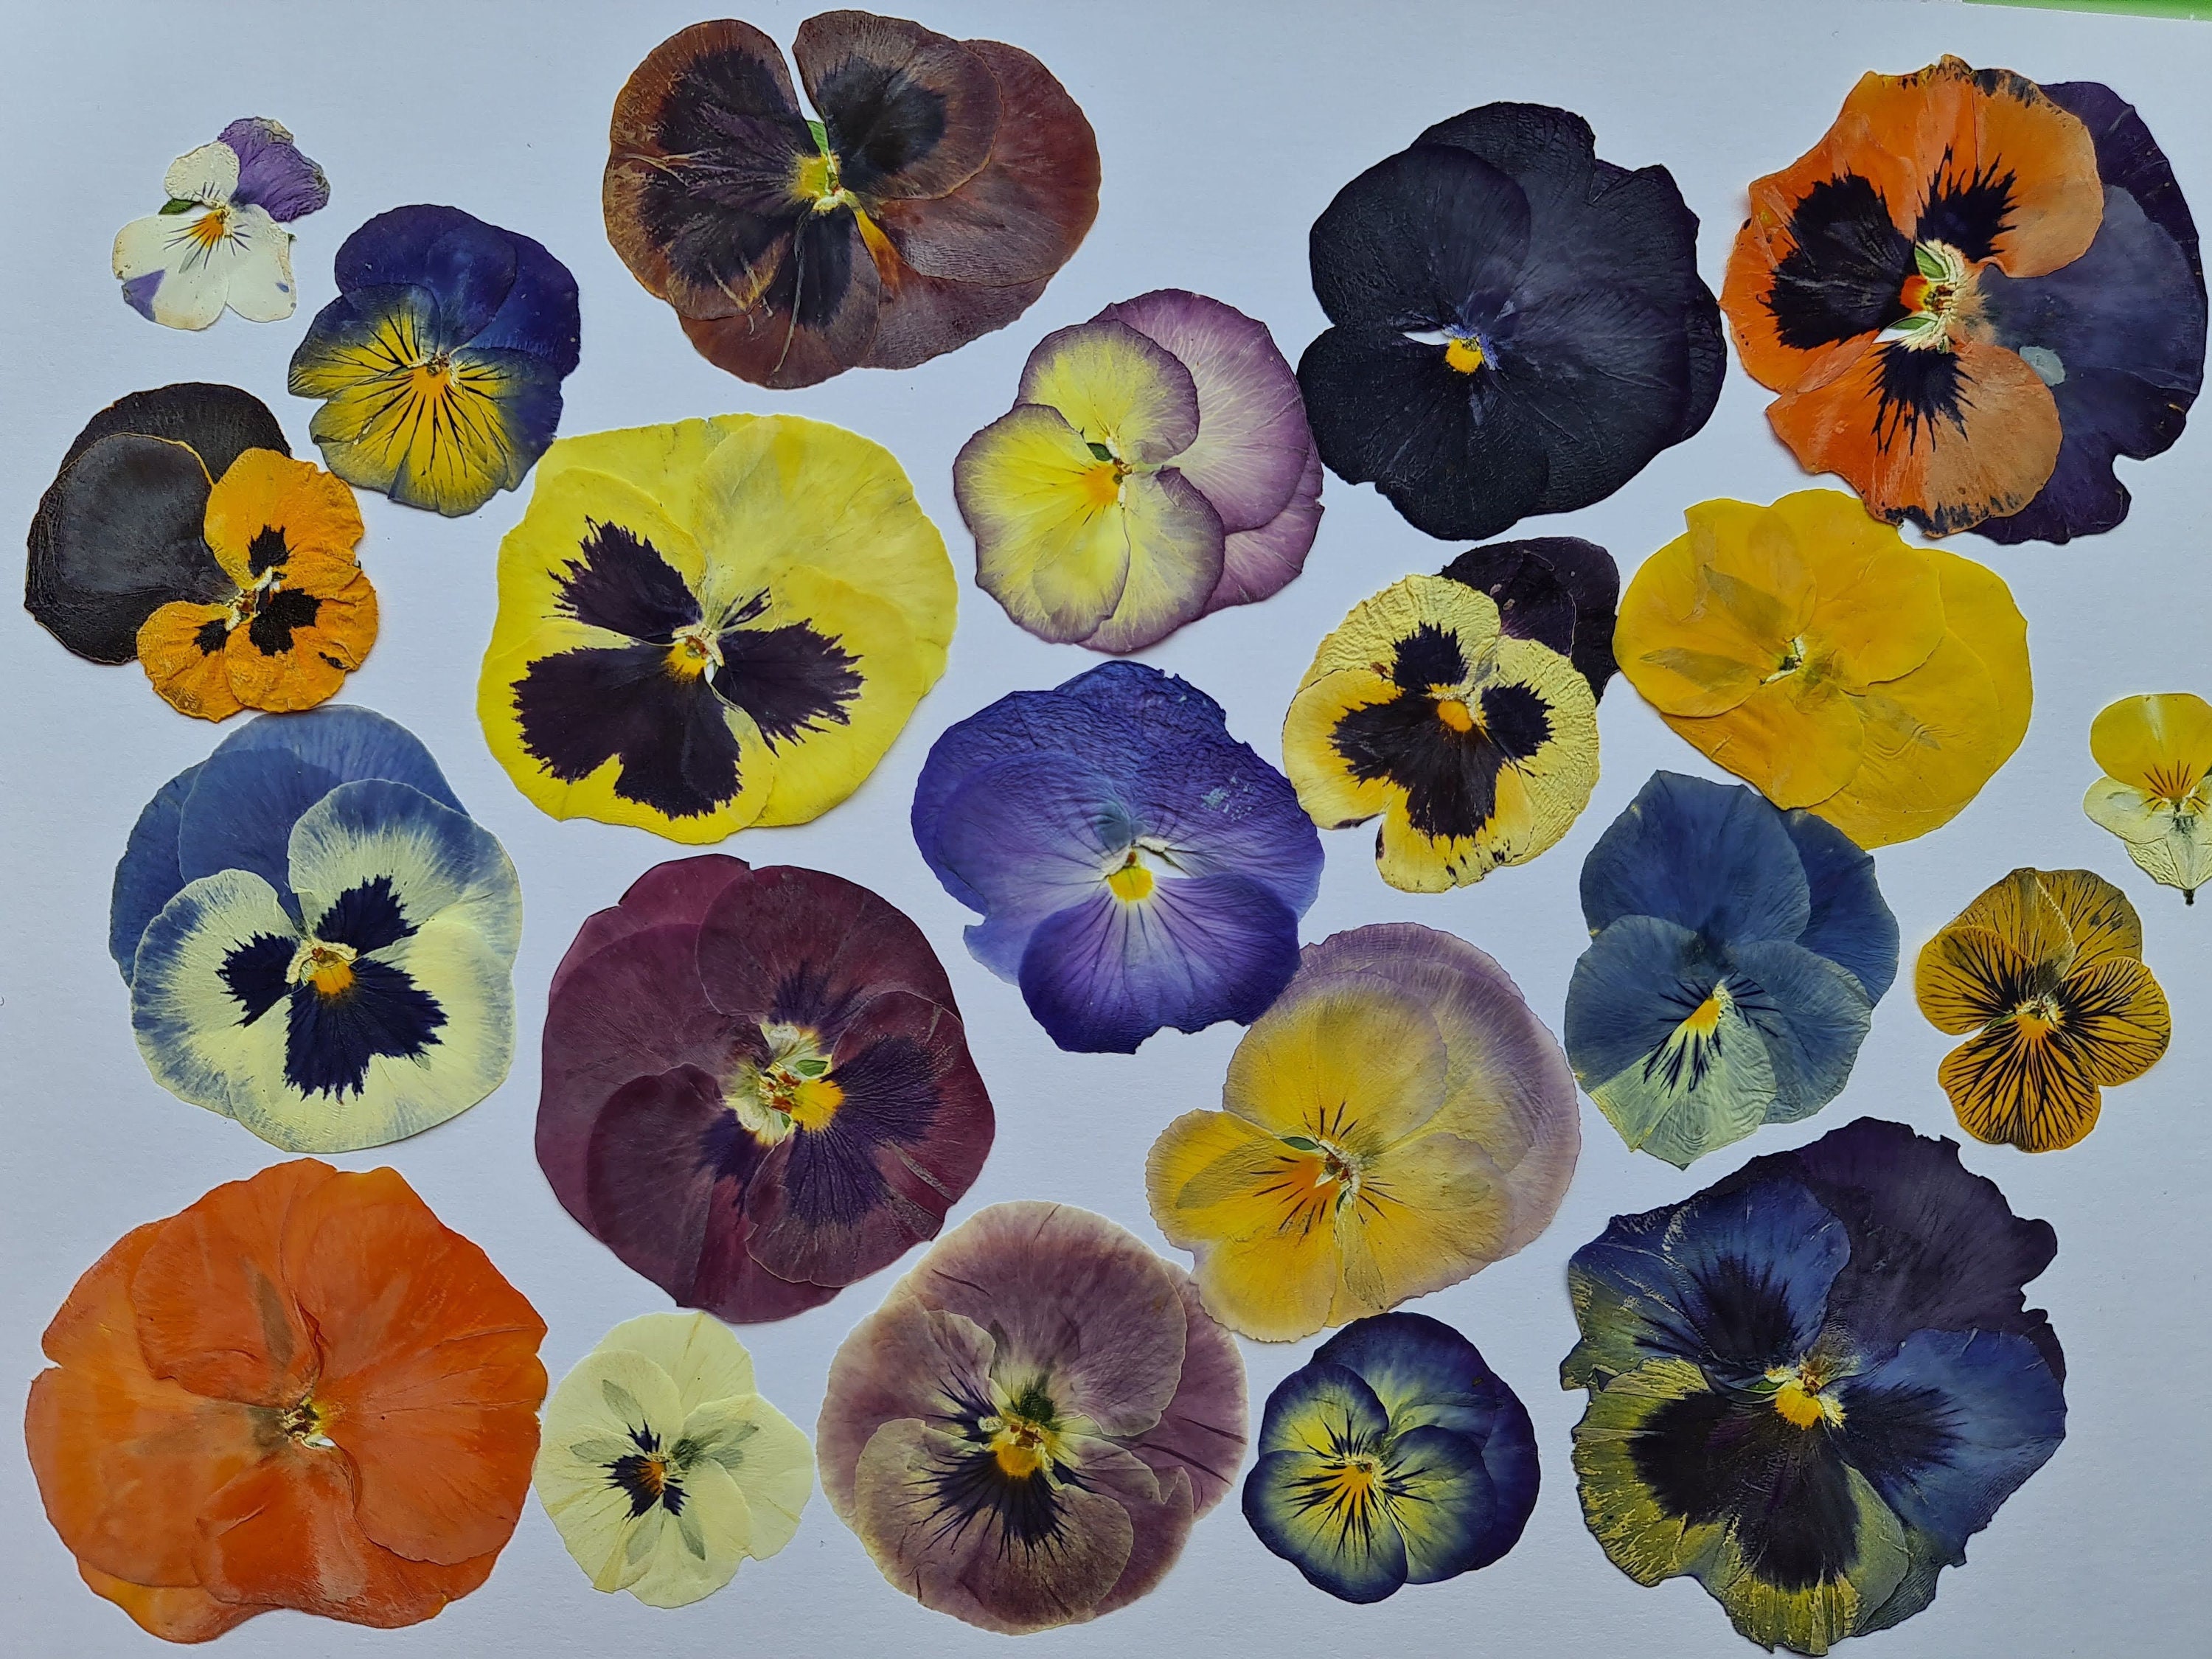 Pressed and Dried Edible Pansy Flowers Organic Grown Sustainably